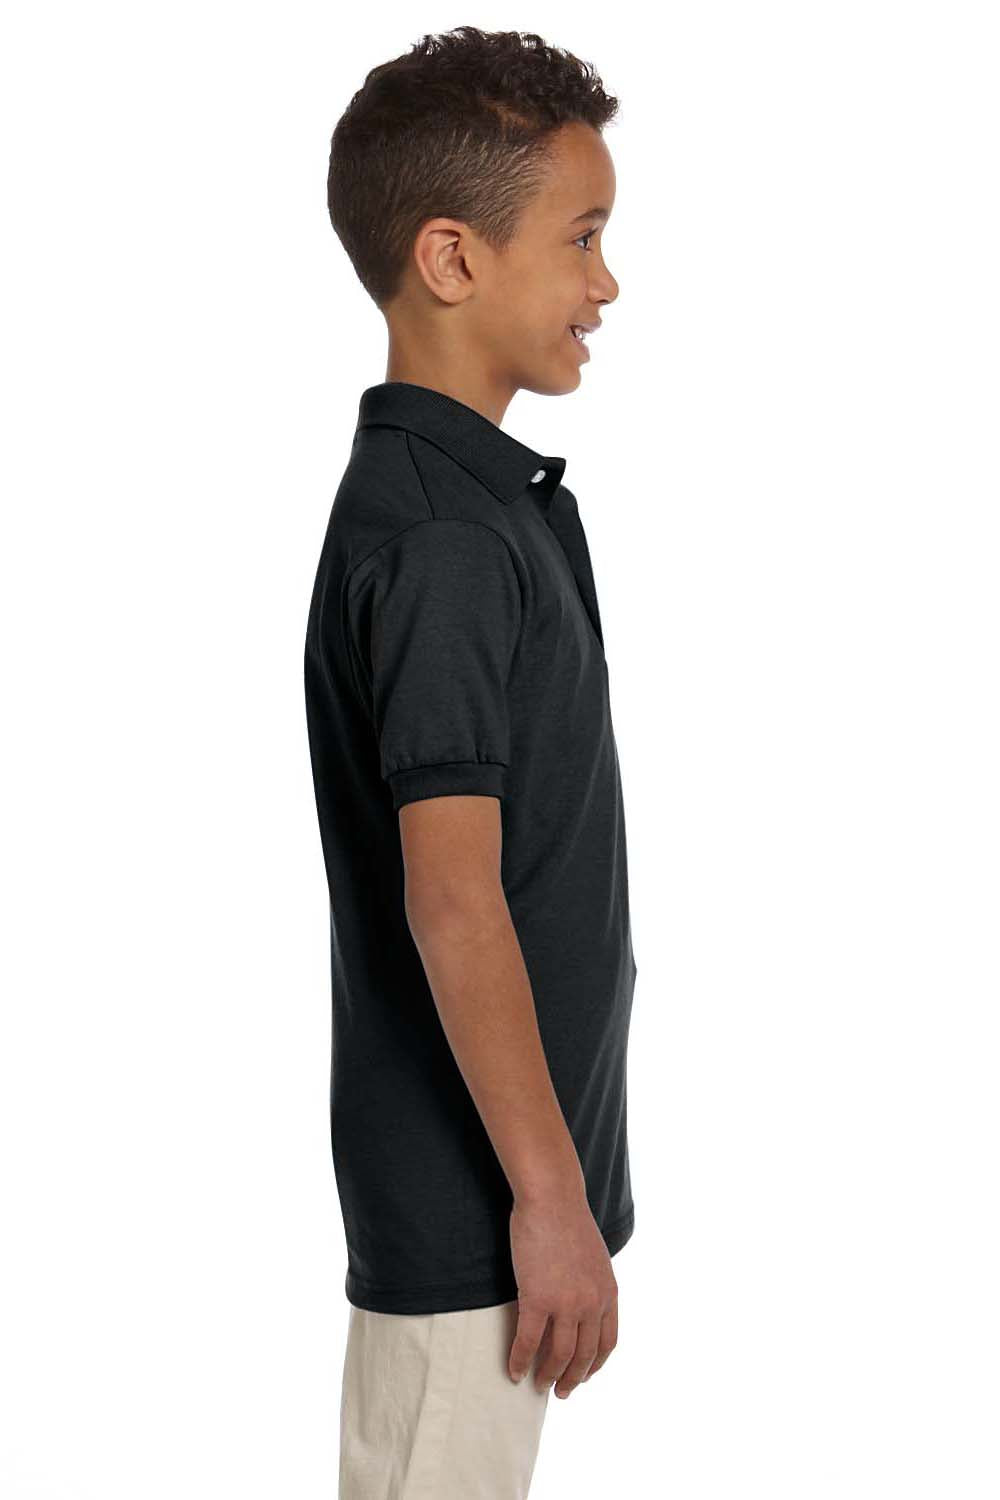 Jerzees 437Y Youth SpotShield Stain Resistant Short Sleeve Polo Shirt Black Side